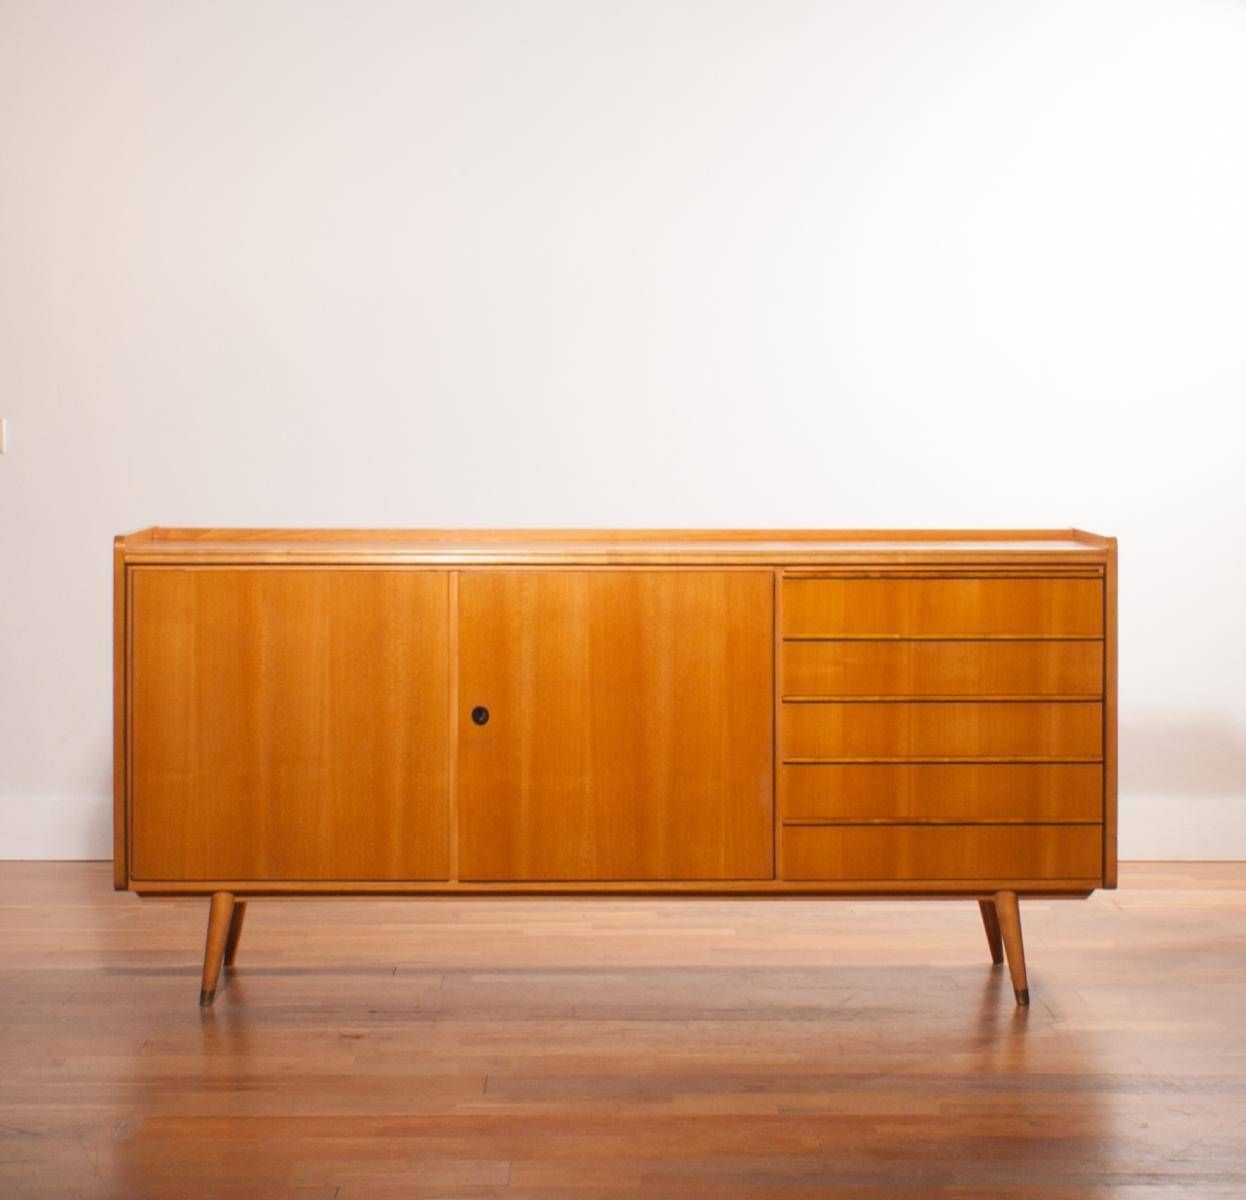 Beech Sideboard, 1950s For Sale At Pamono Intended For Beech Sideboards (View 3 of 20)